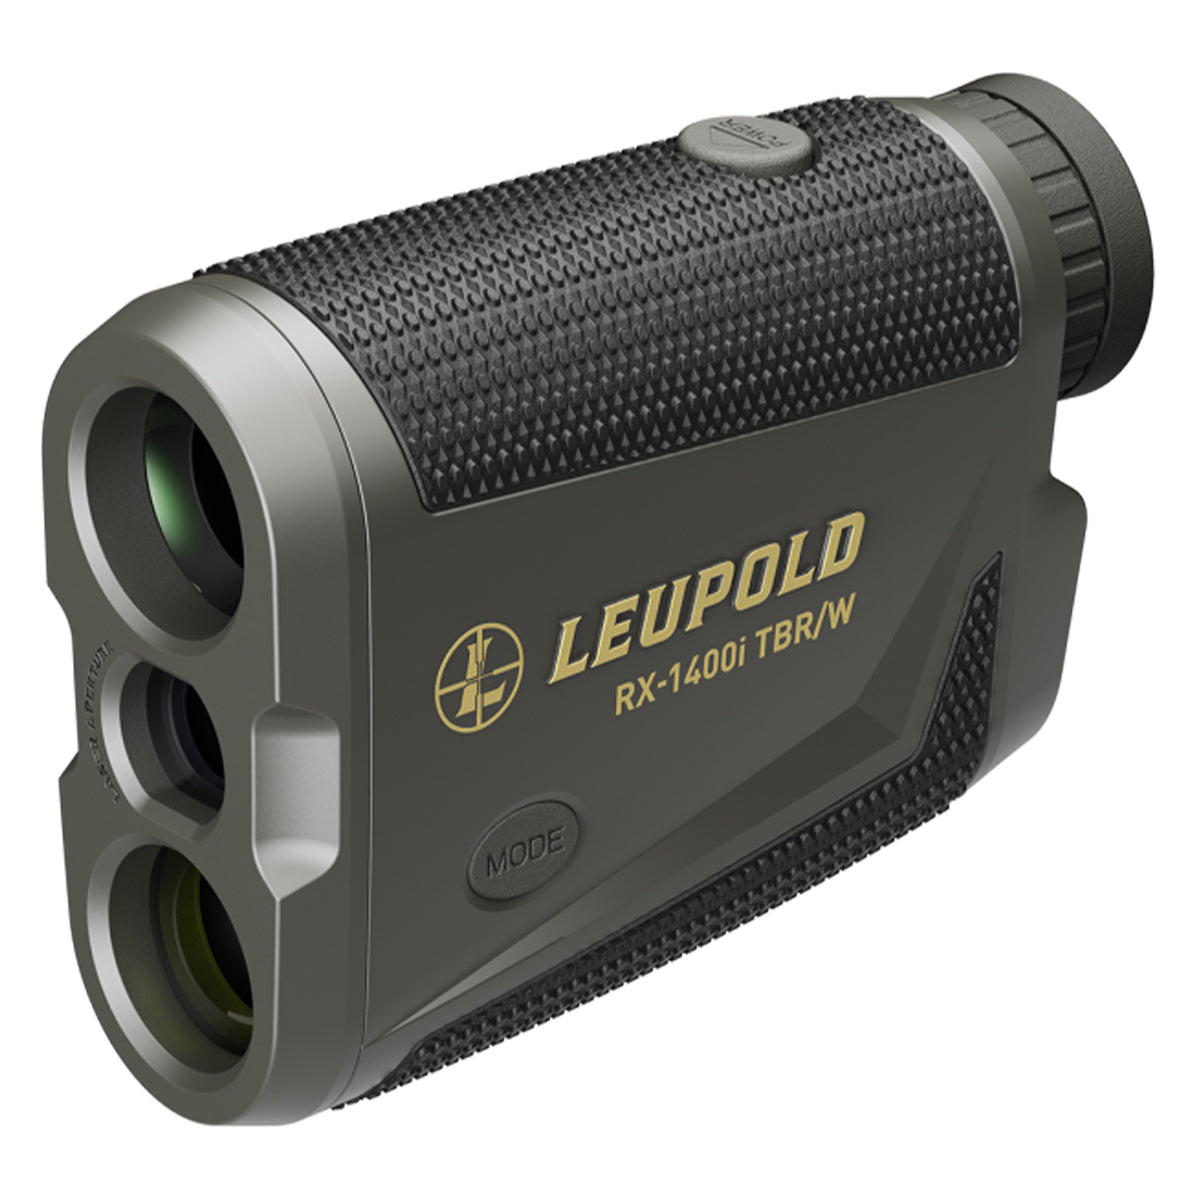 Leupold RX-1400i TBR/W with DNA (179640) in  by GOHUNT | Leupold - GOHUNT Shop